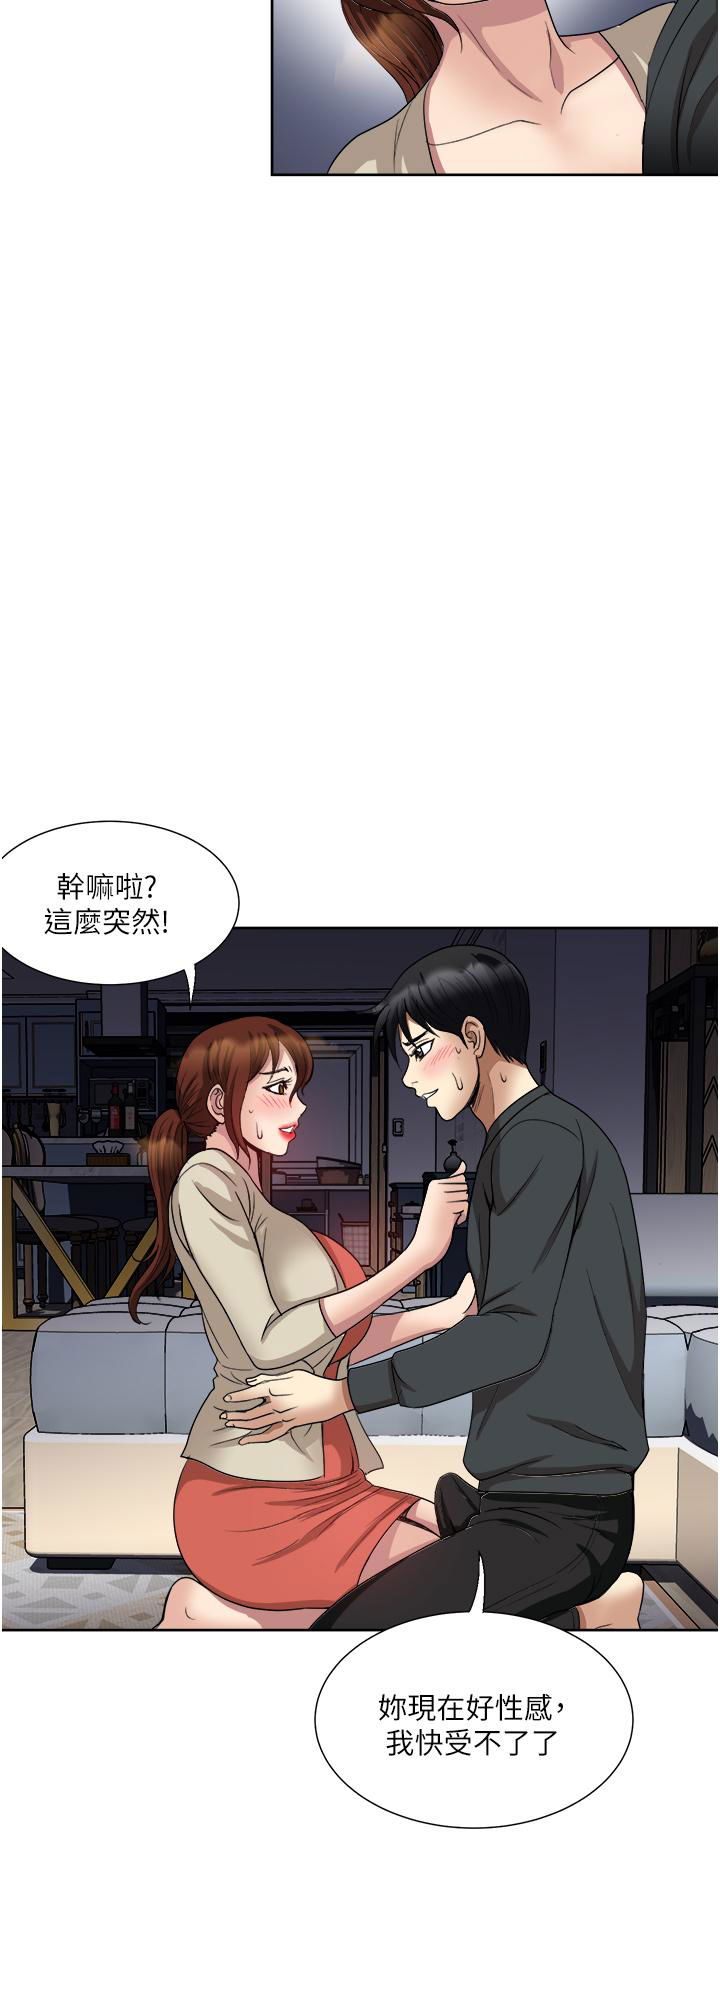 just-once-raw-chap-27-31